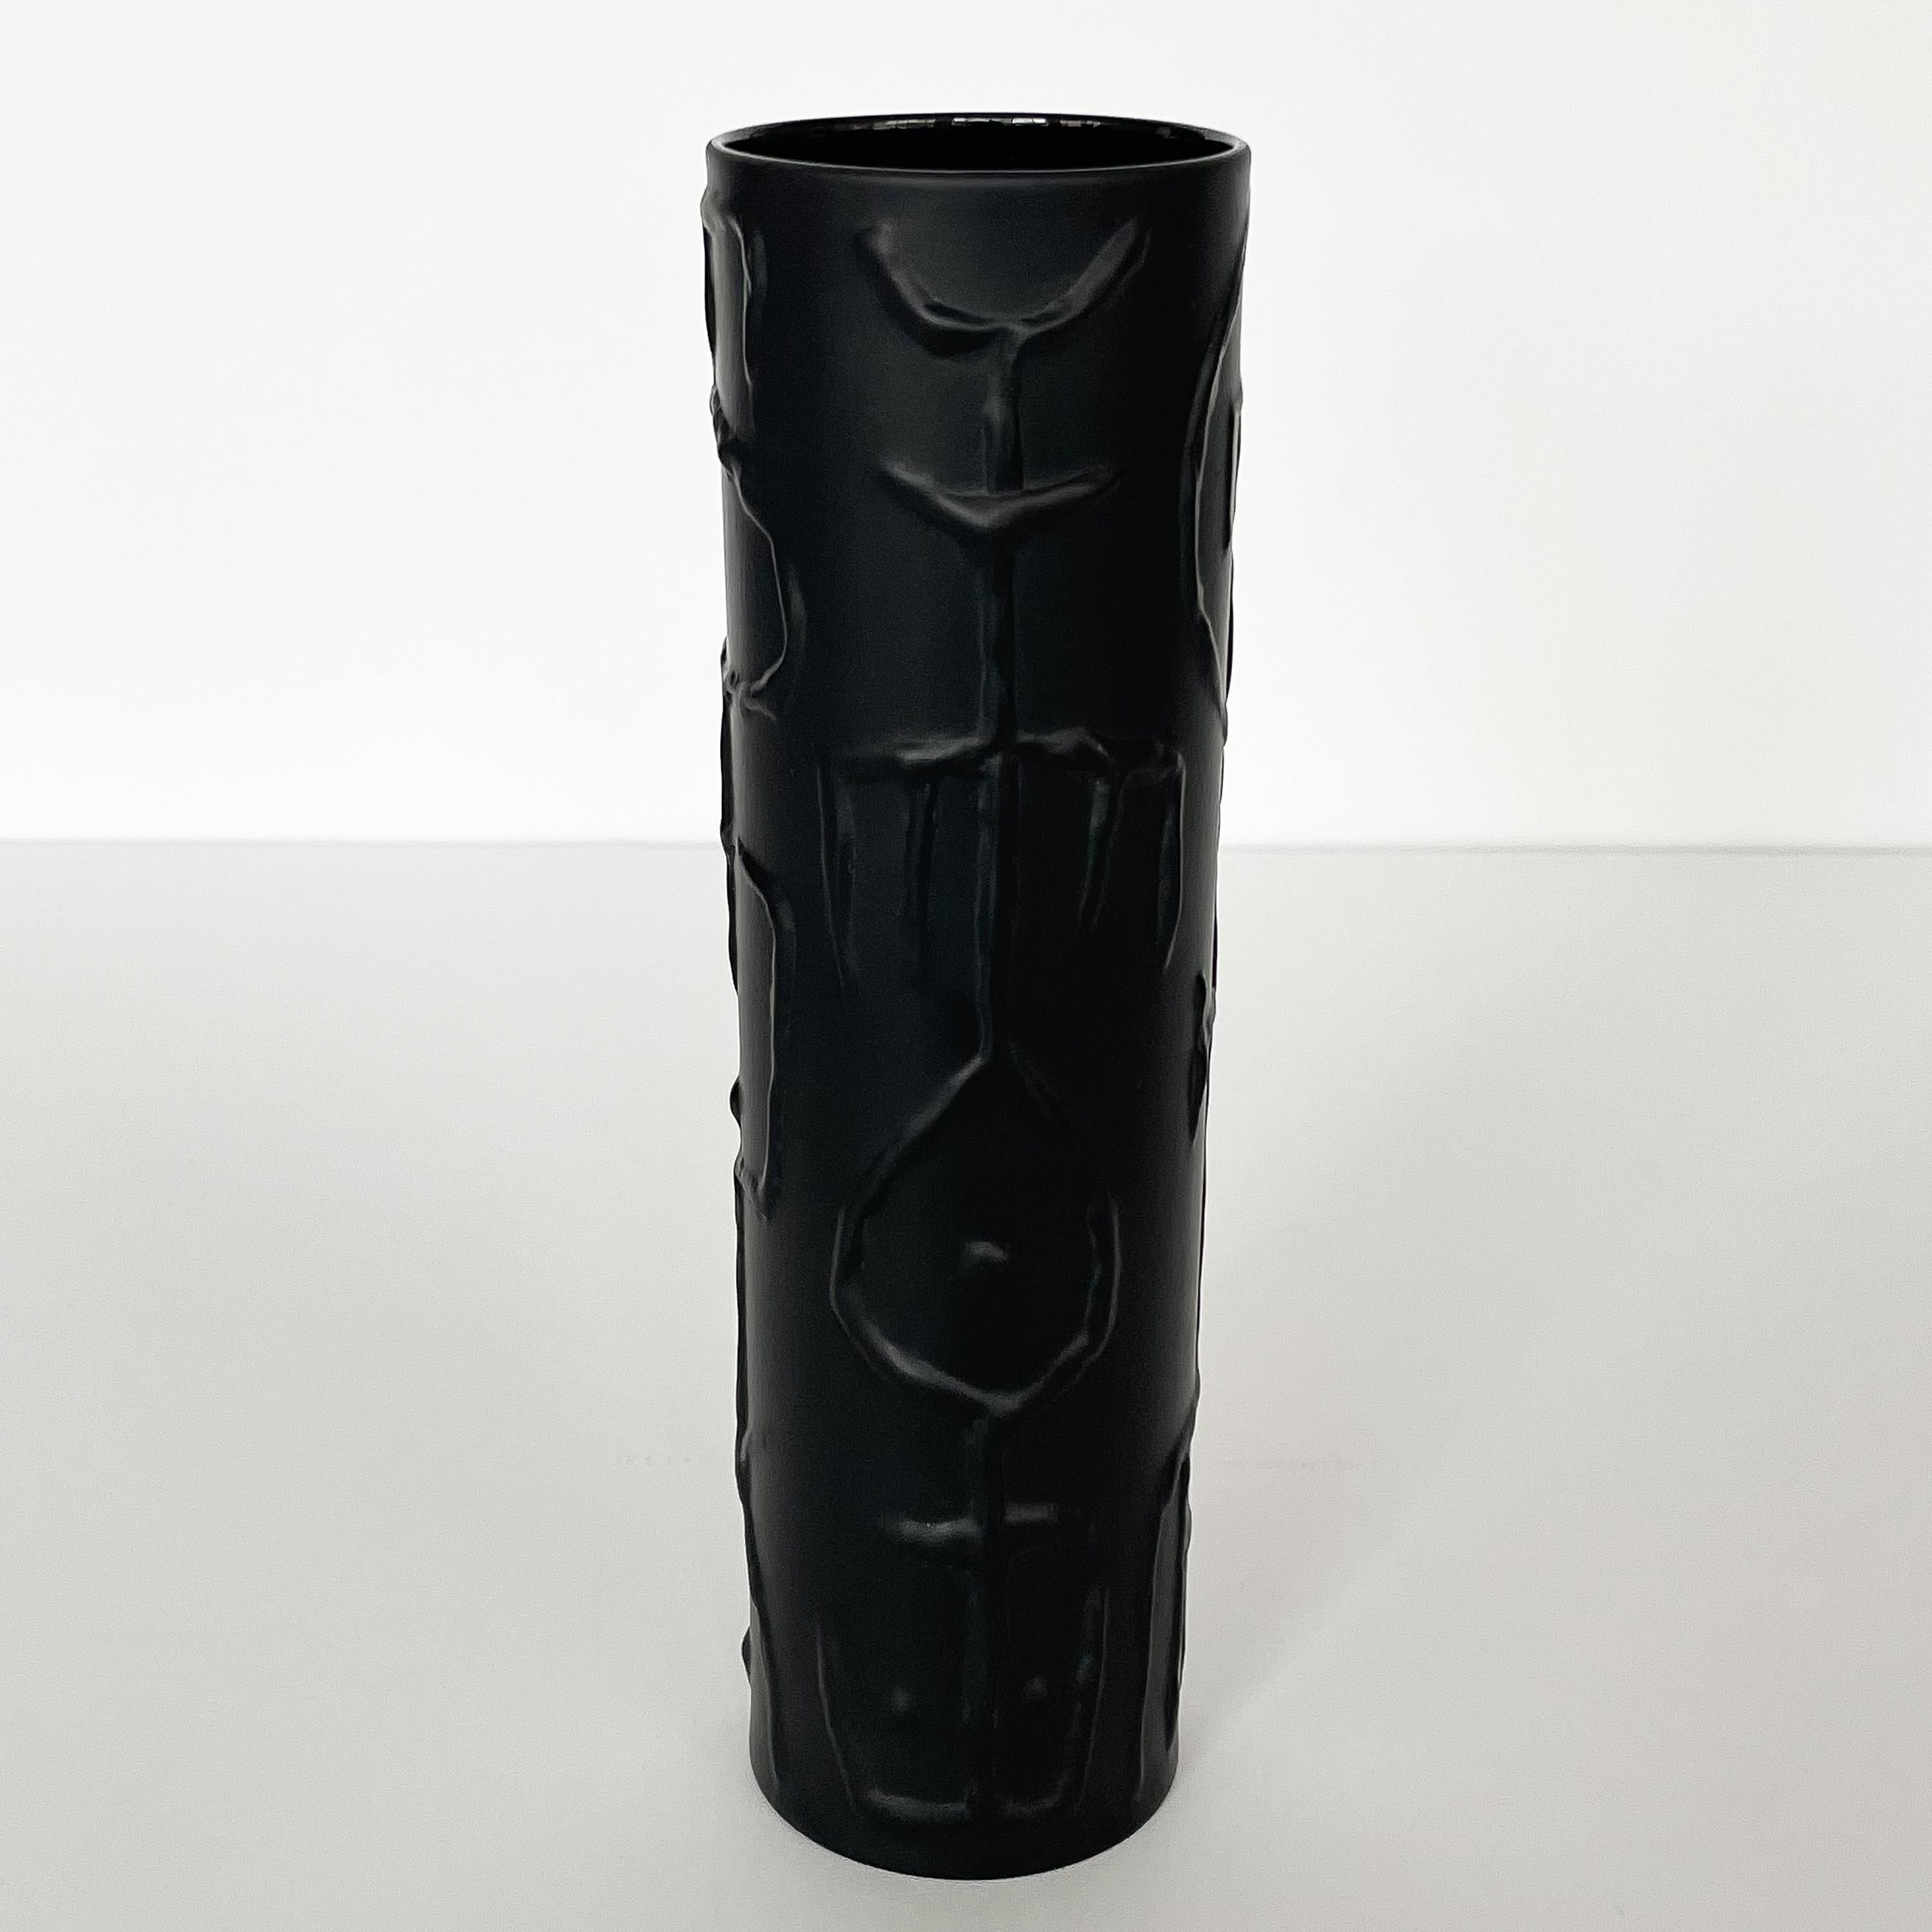 Uncommon black matte abstract porcelain vase by Cuno Fischer for Rosenthal, Germany, circa 1970s. Black matte glazed porcelain cylinder with a graphic raised geometric tribal motif. Marked to the bottom with Rosenthal, Studio Line and the artist's